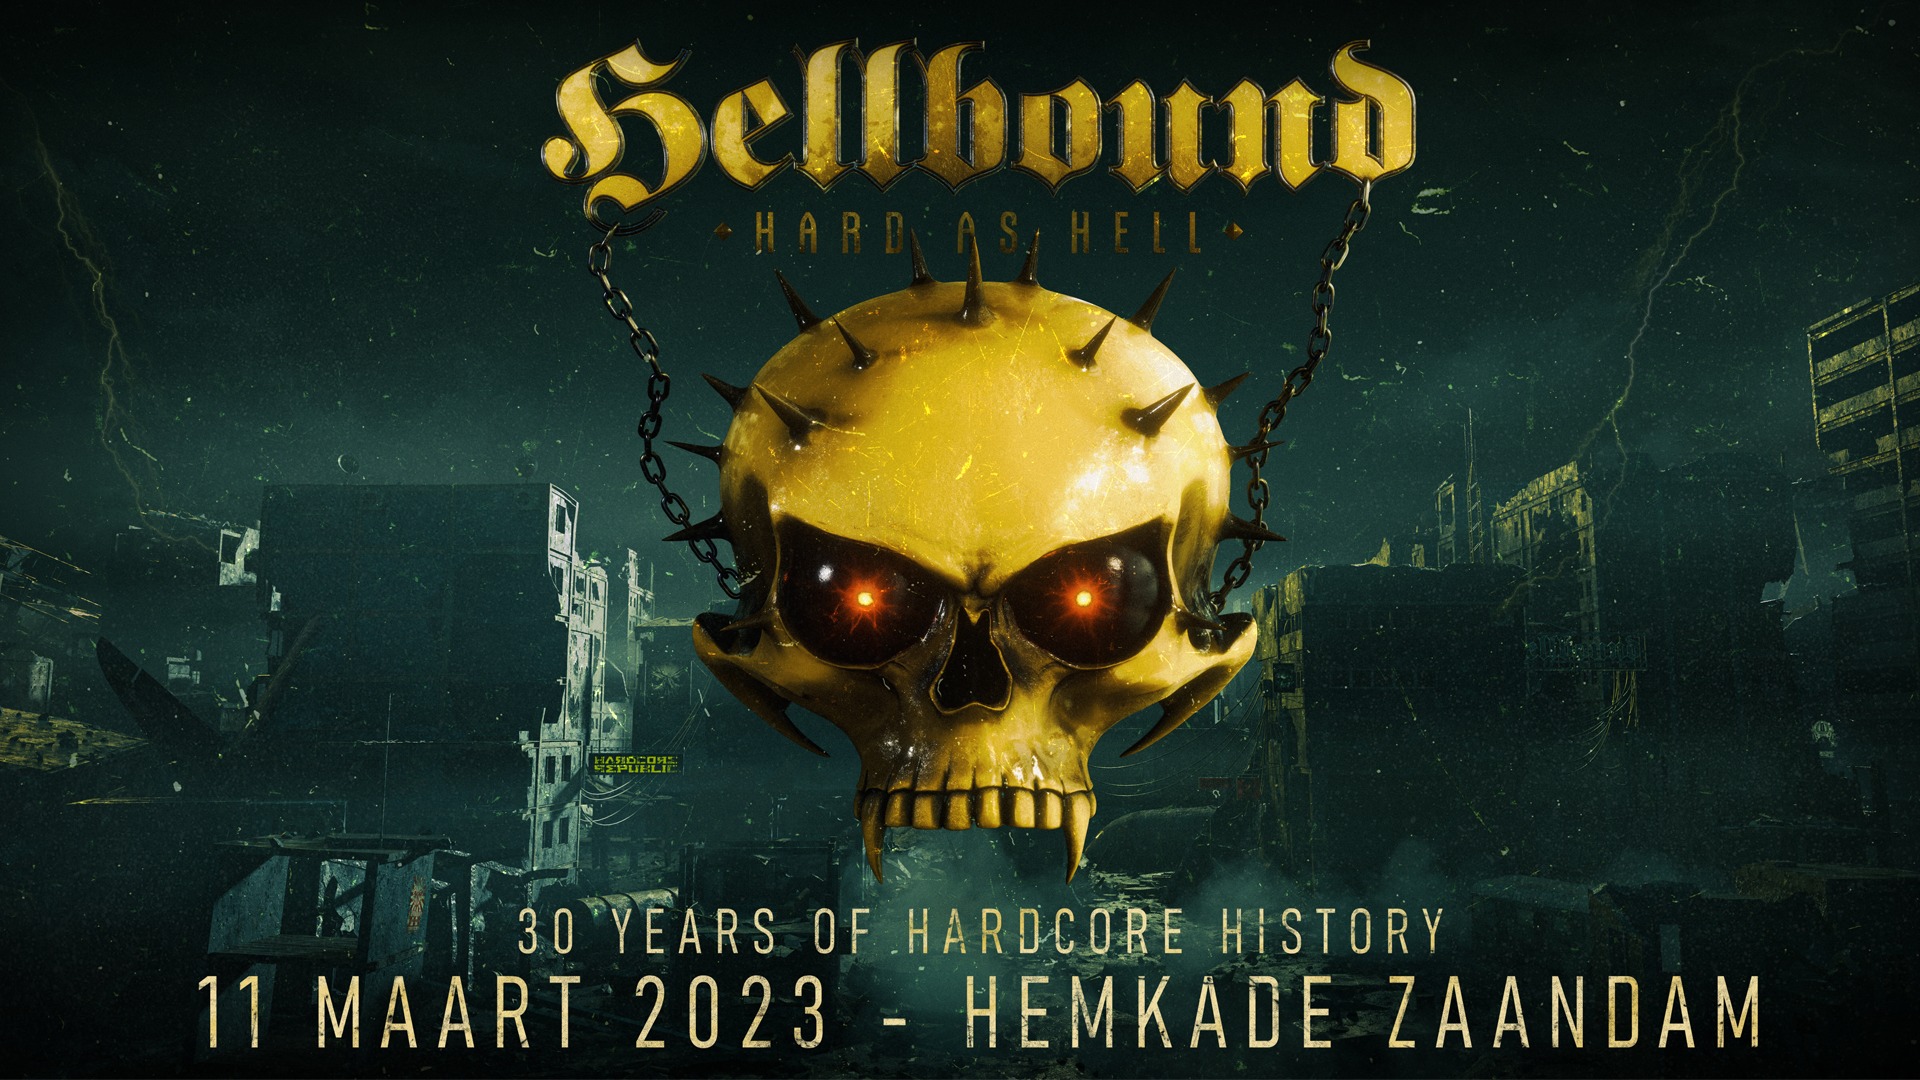 HELLBOUND | 30 YEARS OF HARDCORE HISTORY